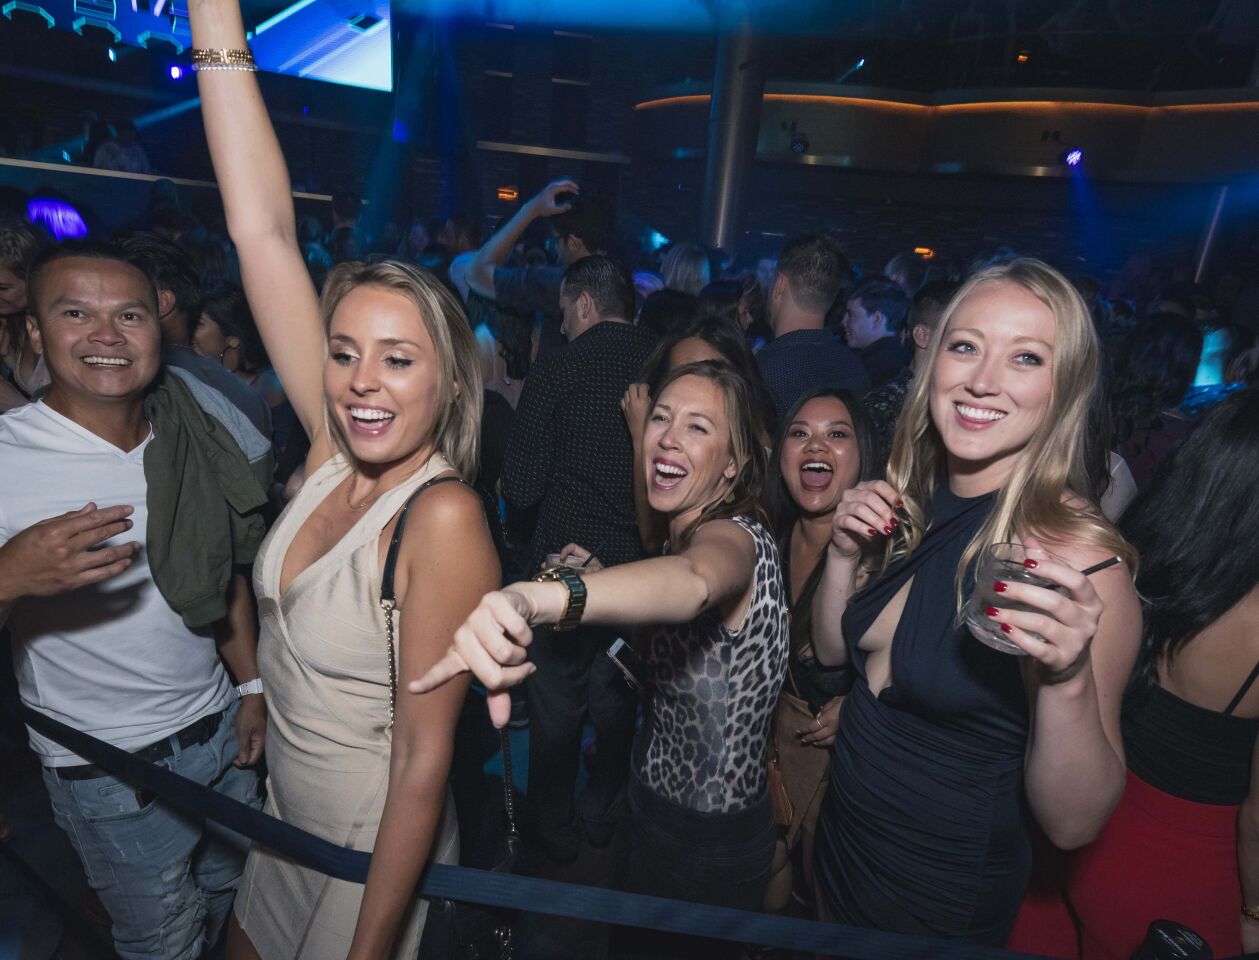 Mega producer and DJ Diplo showed San Diego some love at OMNIA Nightclub in the Gaslamp on Friday, May 24, 2019.